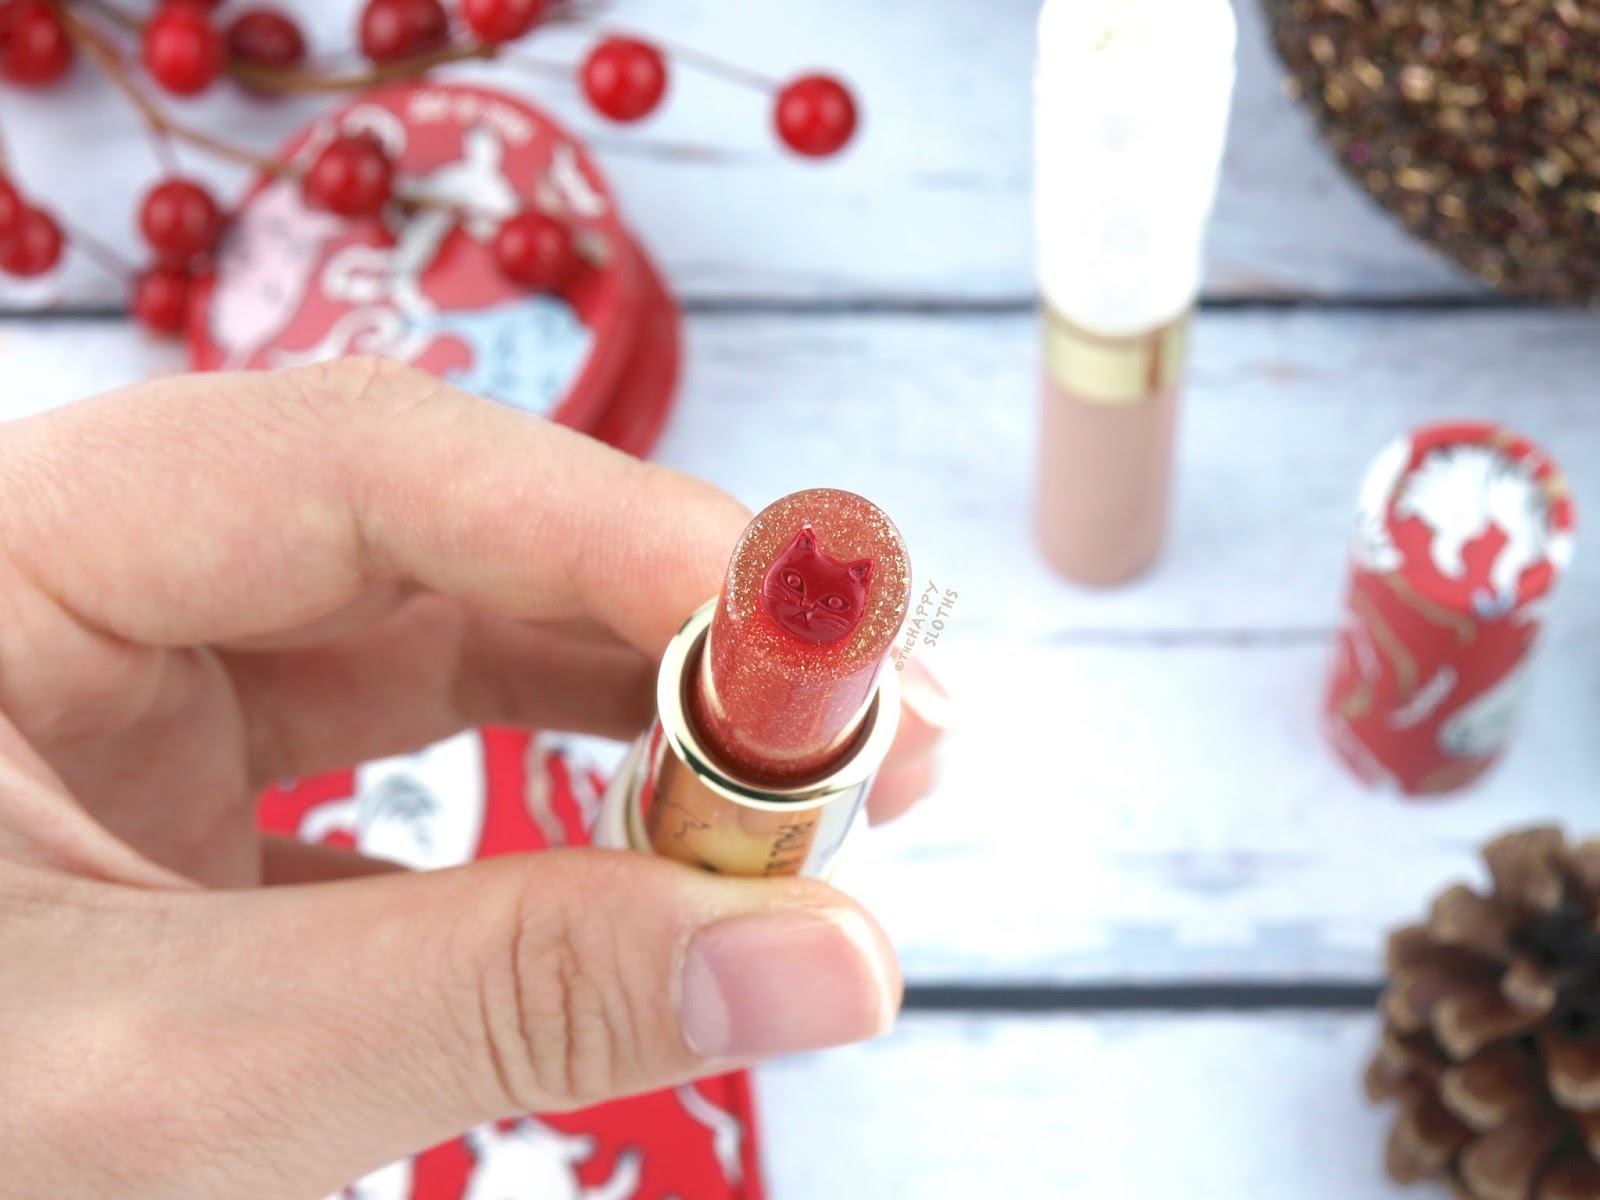 Paul & Joe Holiday 2017 Makeup Collection Cat Lipstick | Review and Swatches